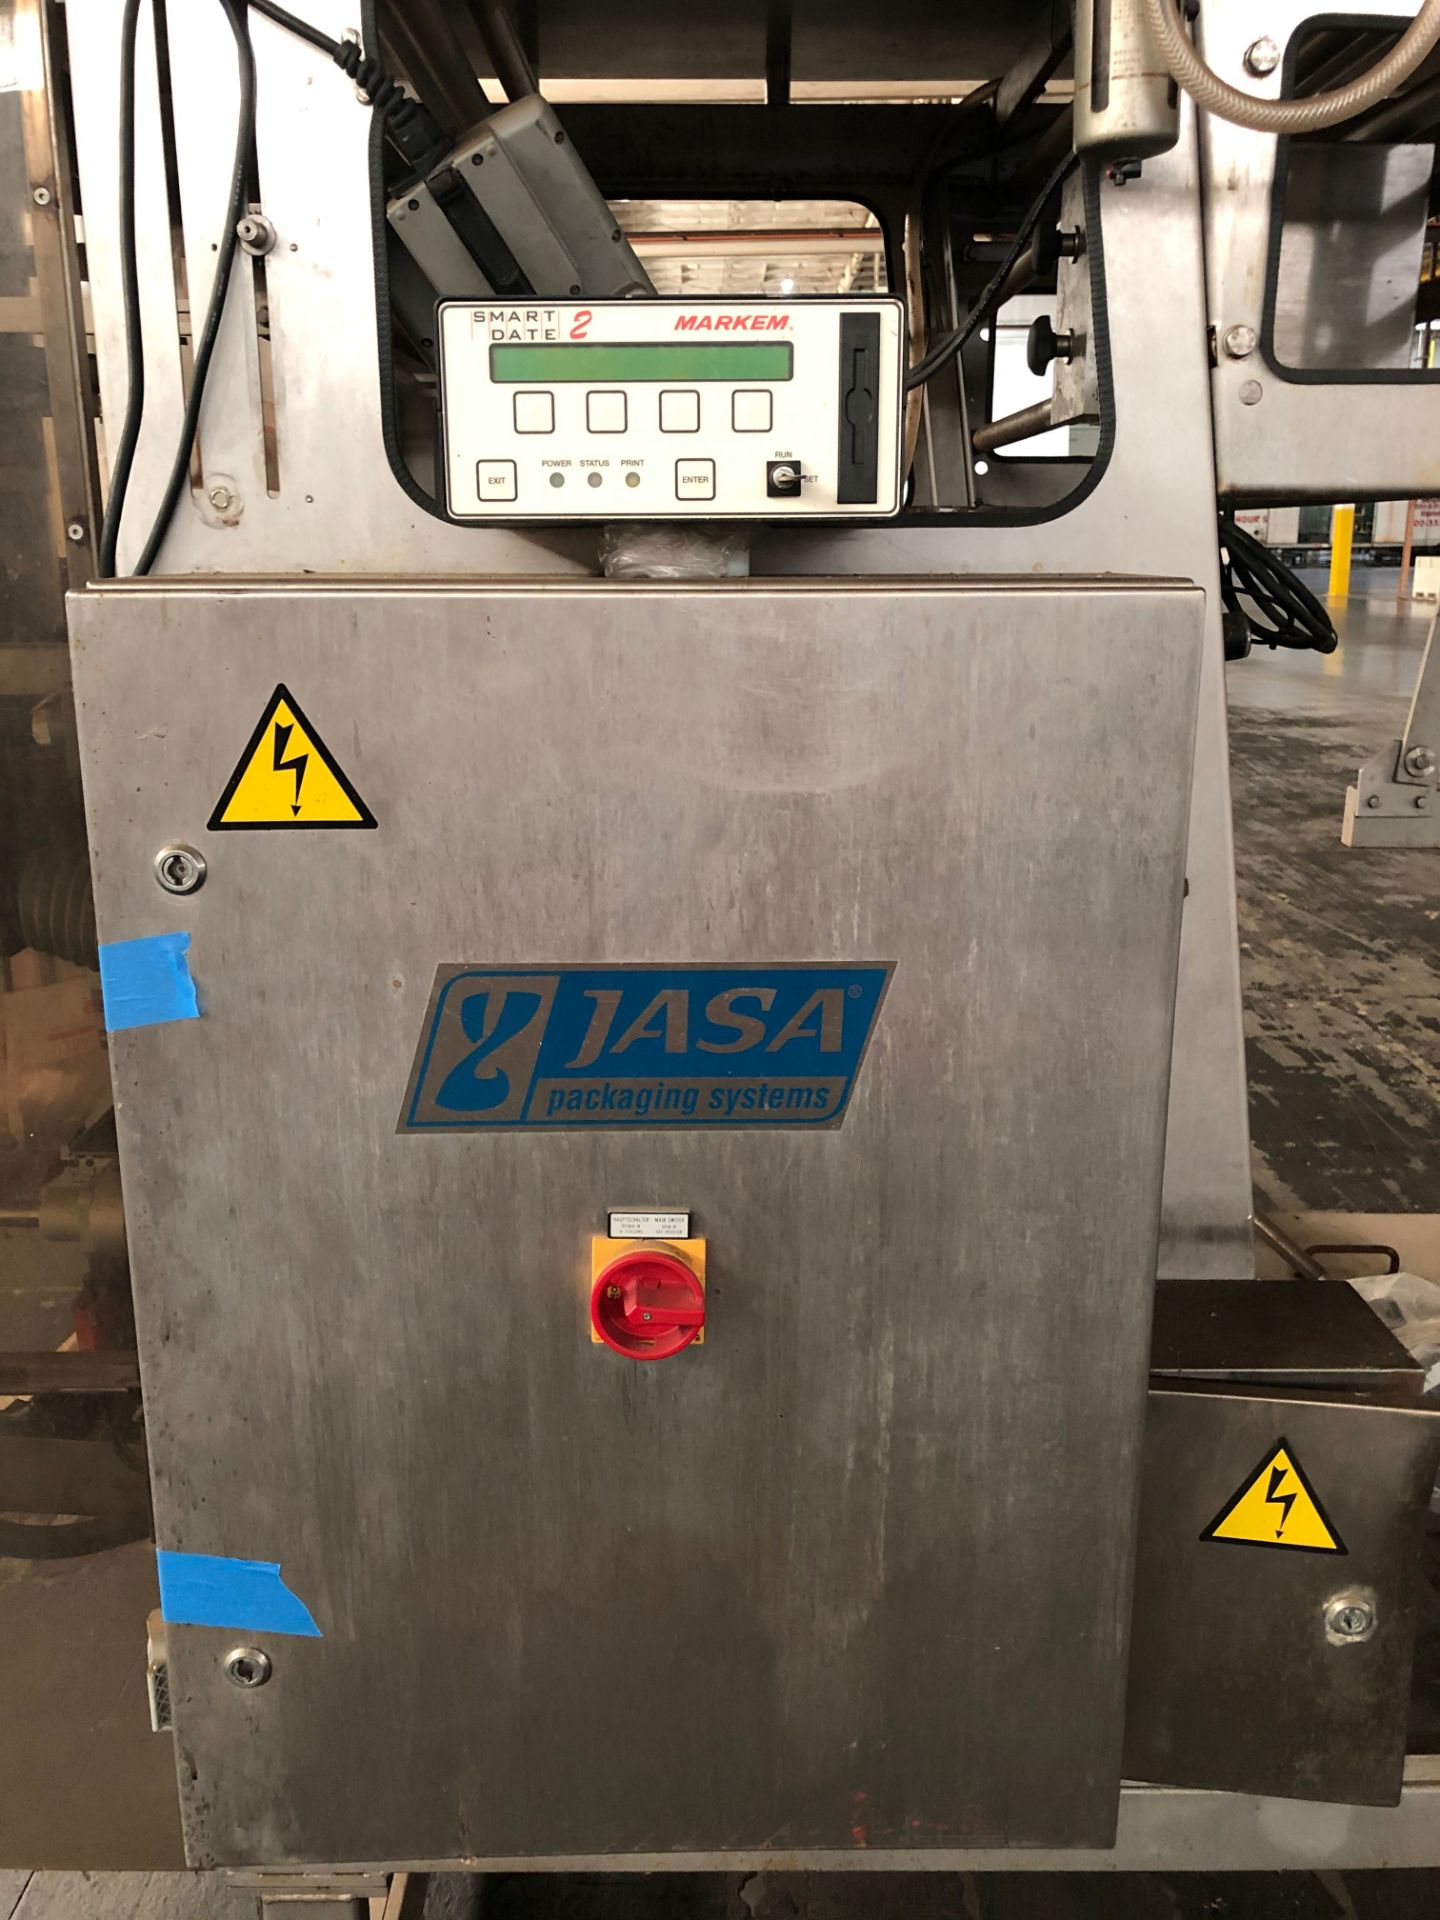 Jasa Packaging Unit, Model #350, S/N #11024, 230 Volts Rigging Price: $250 - Image 6 of 6